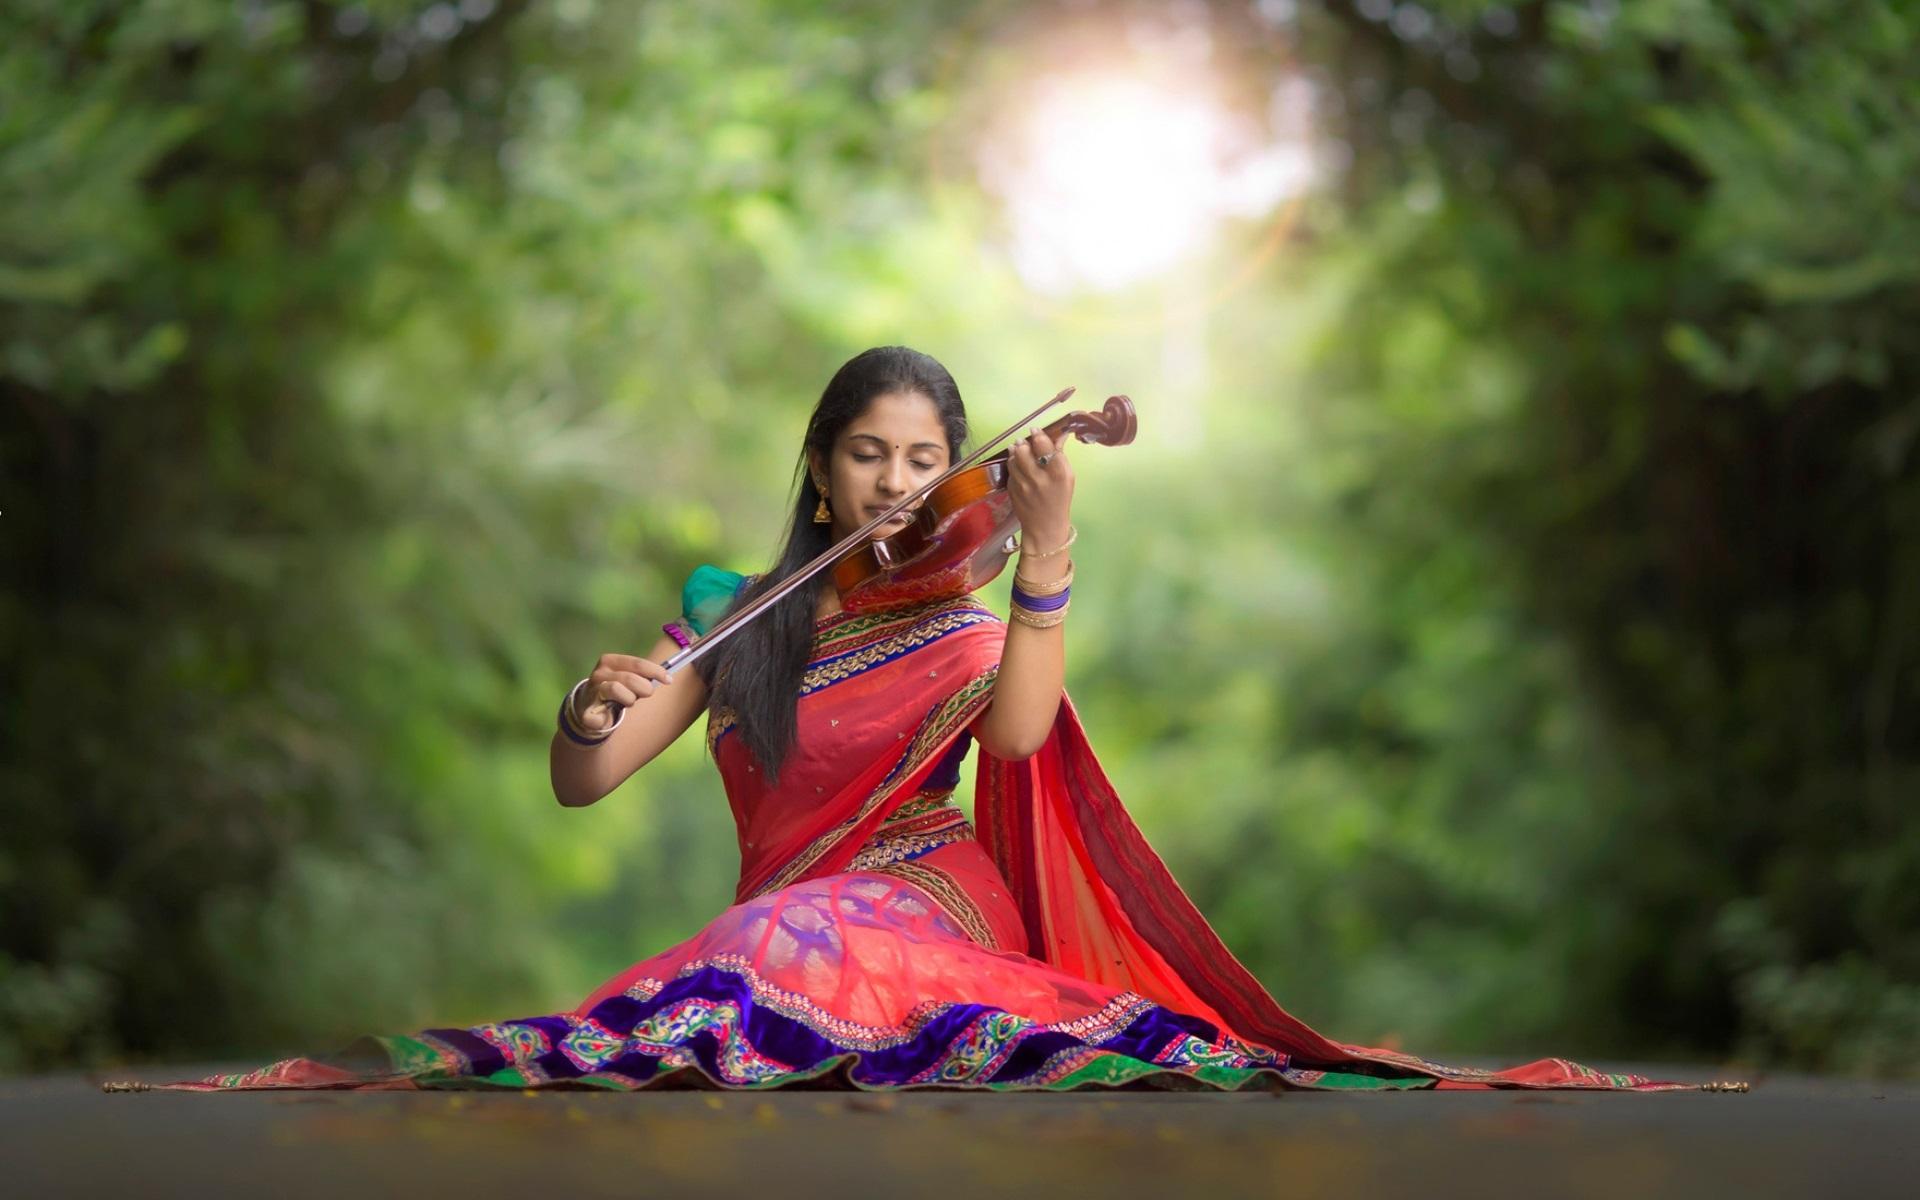 Wallpaper Indian girl, violin, music, road 1920x1200 HD Picture, Image